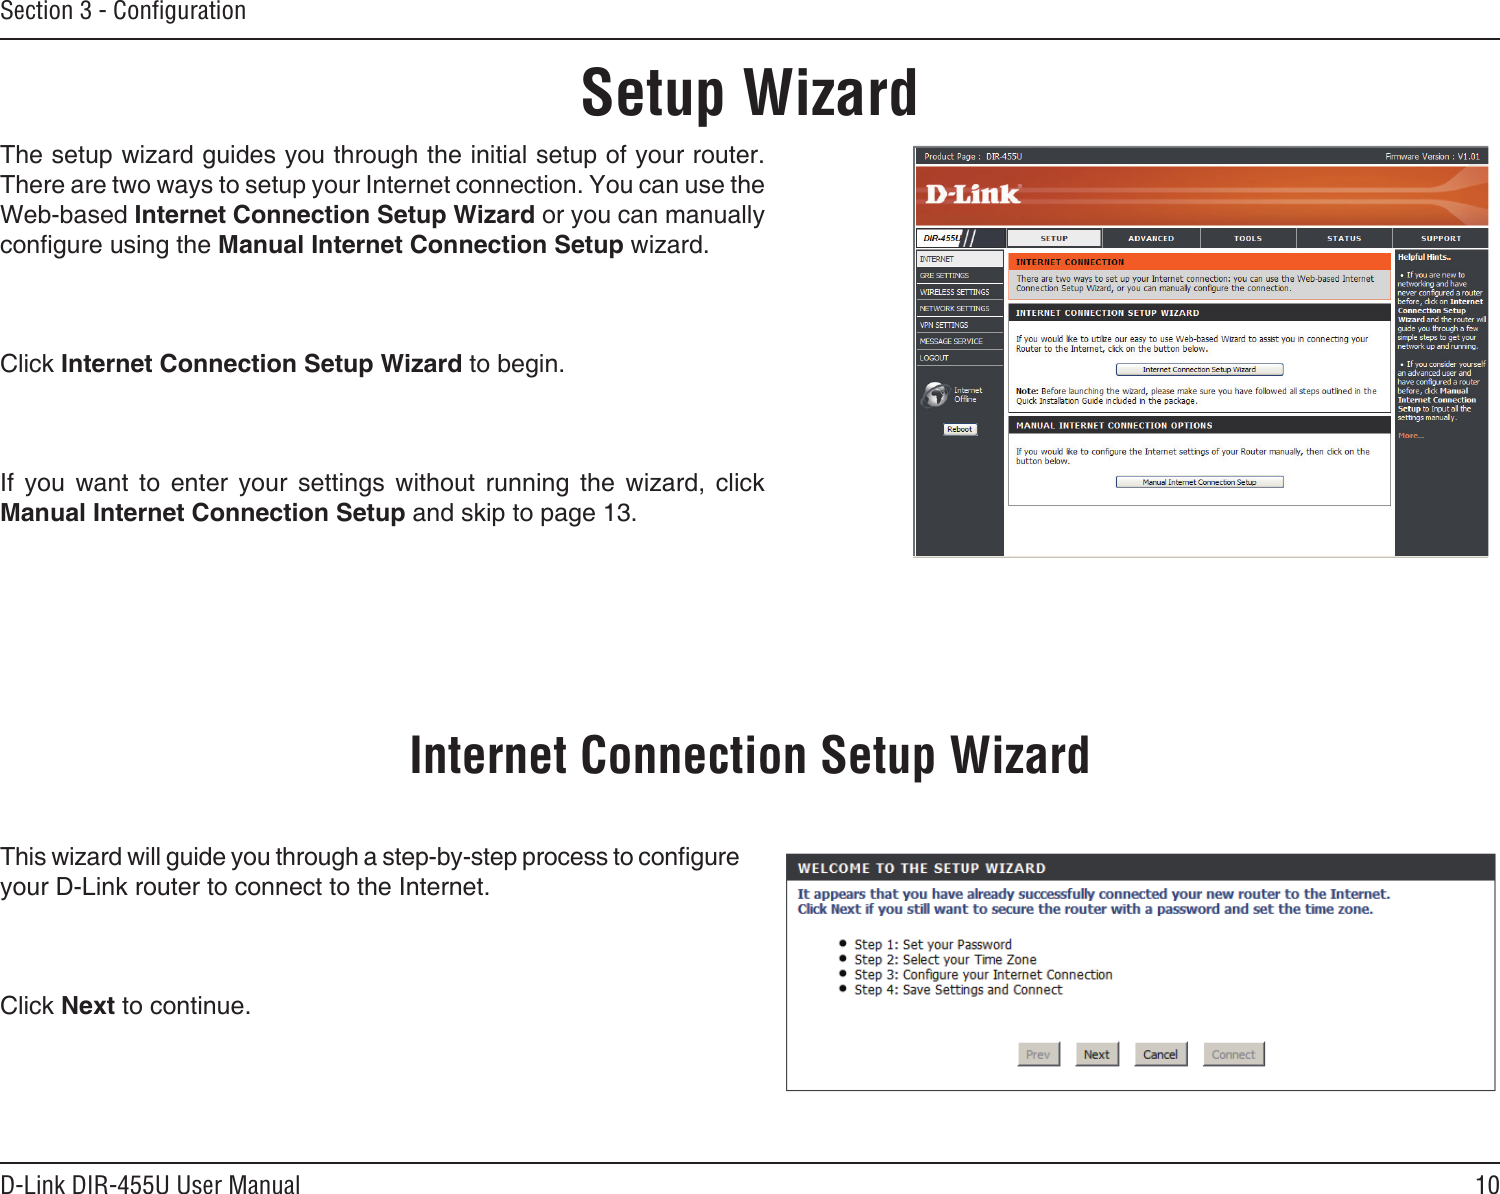 10D-Link DIR-455U User ManualSection 3 - ConﬁgurationSetup WizardThe setup wizard guides you through the initial setup of your router. There are two ways to setup your Internet connection. You can use the Web-based Internet Connection Setup Wizard or you can manually congure using the Manual Internet Connection Setup wizard.Click Internet Connection Setup Wizard to begin.If  you  want  to  enter  your  settings  without  running  the  wizard,  click Manual Internet Connection Setup and skip to page 13.This wizard will guide you through a step-by-step process to congure your D-Link router to connect to the Internet.Click Next to continue.Internet Connection Setup Wizard